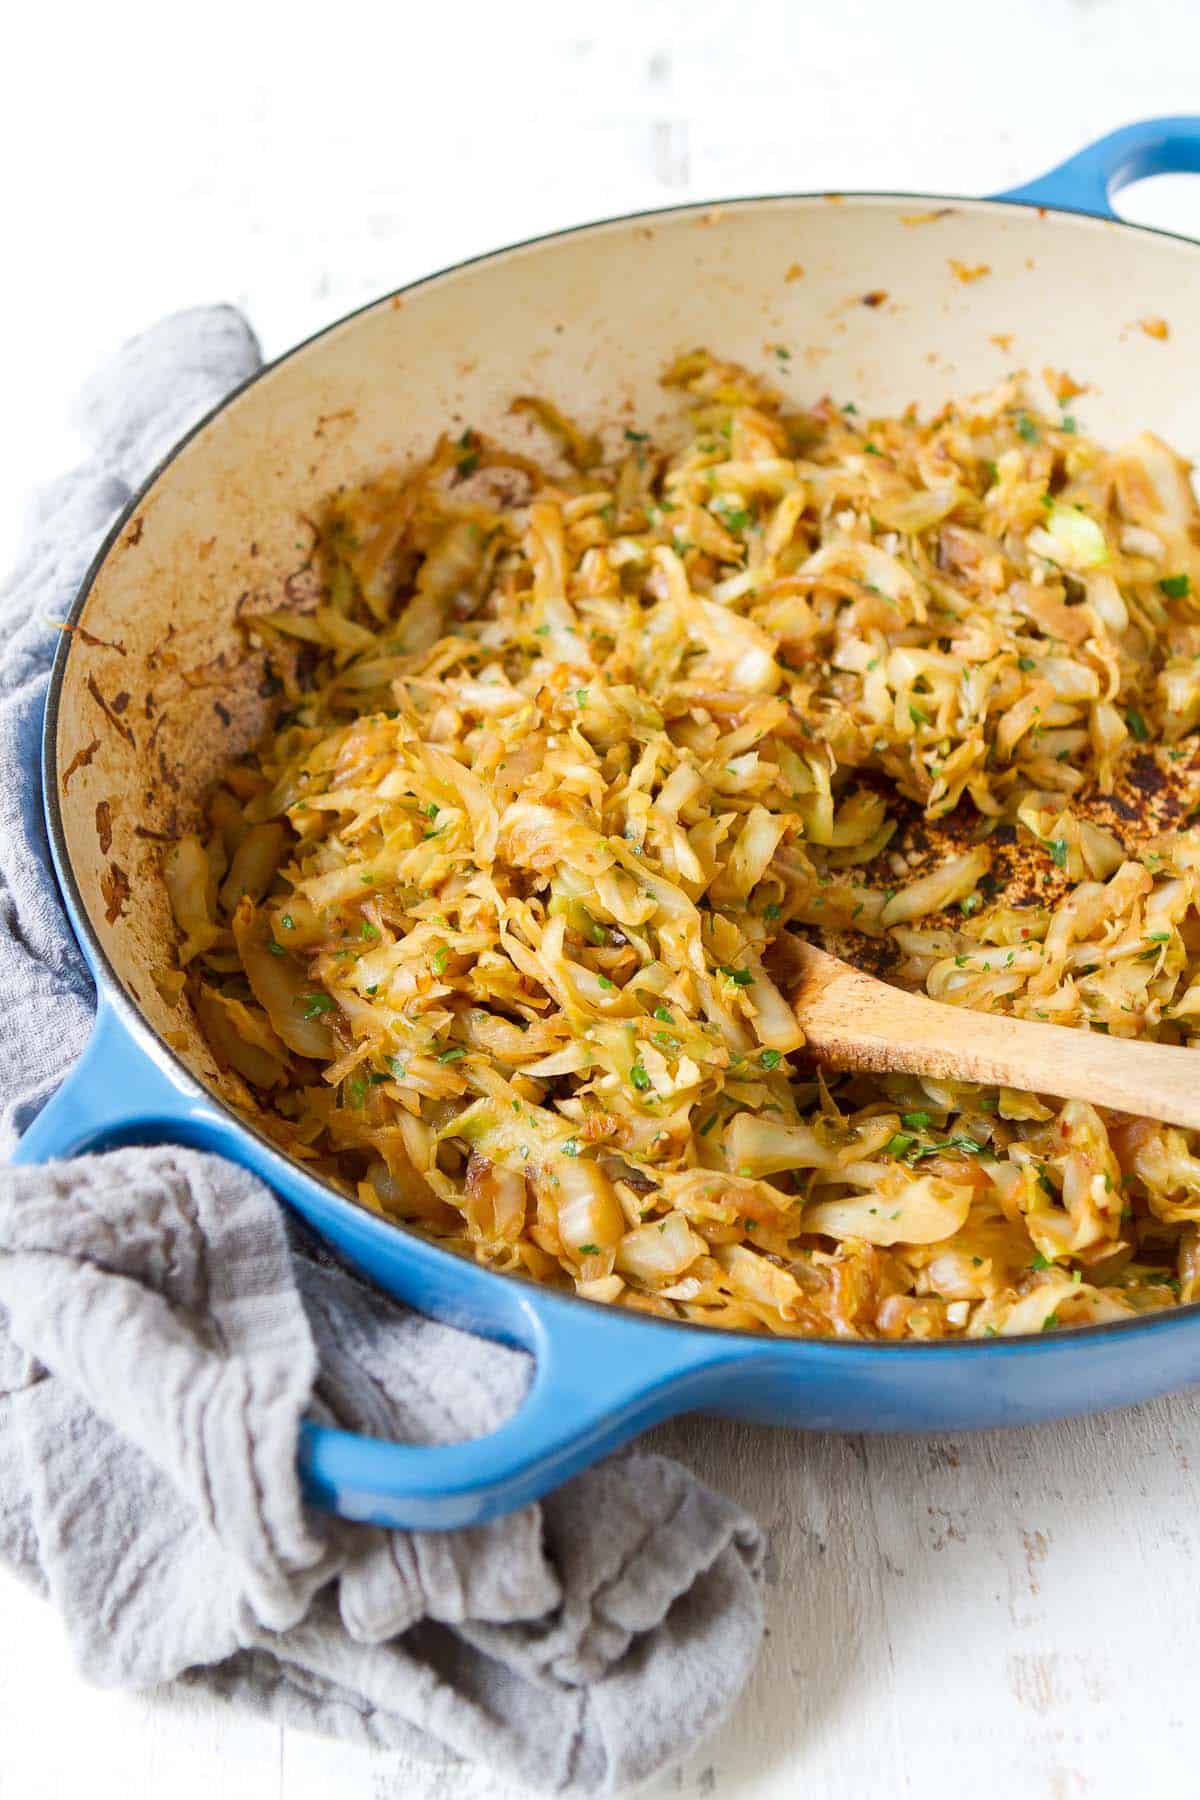 Sauteed cabbage and onions in a large skillet, with a wooden spoon.